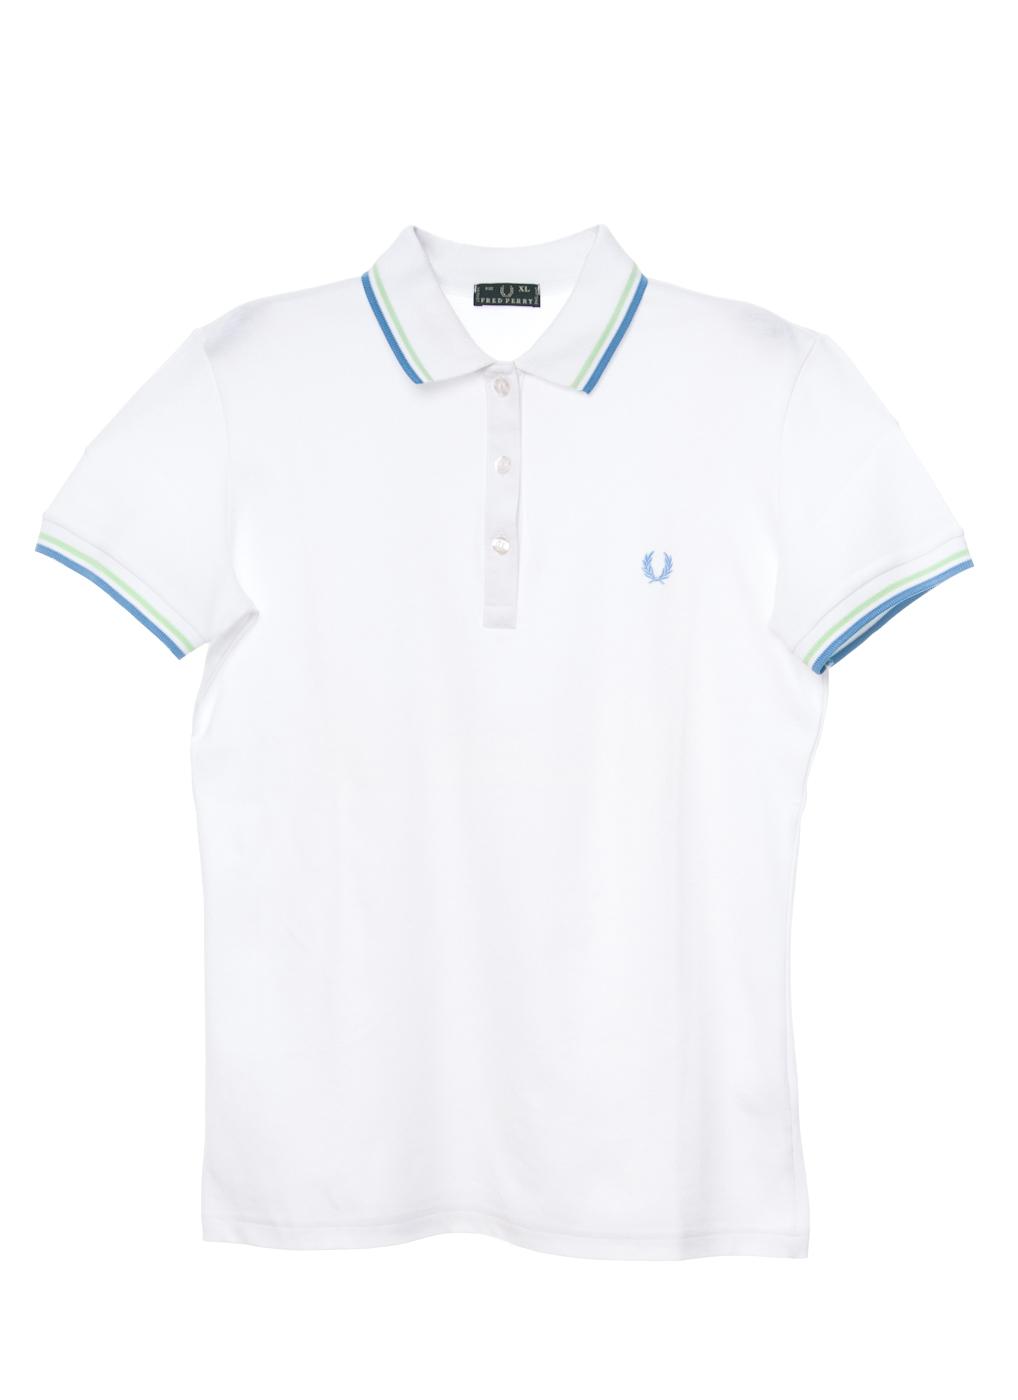 Foto Polo Fred Perry Stretch Blue foto 200400